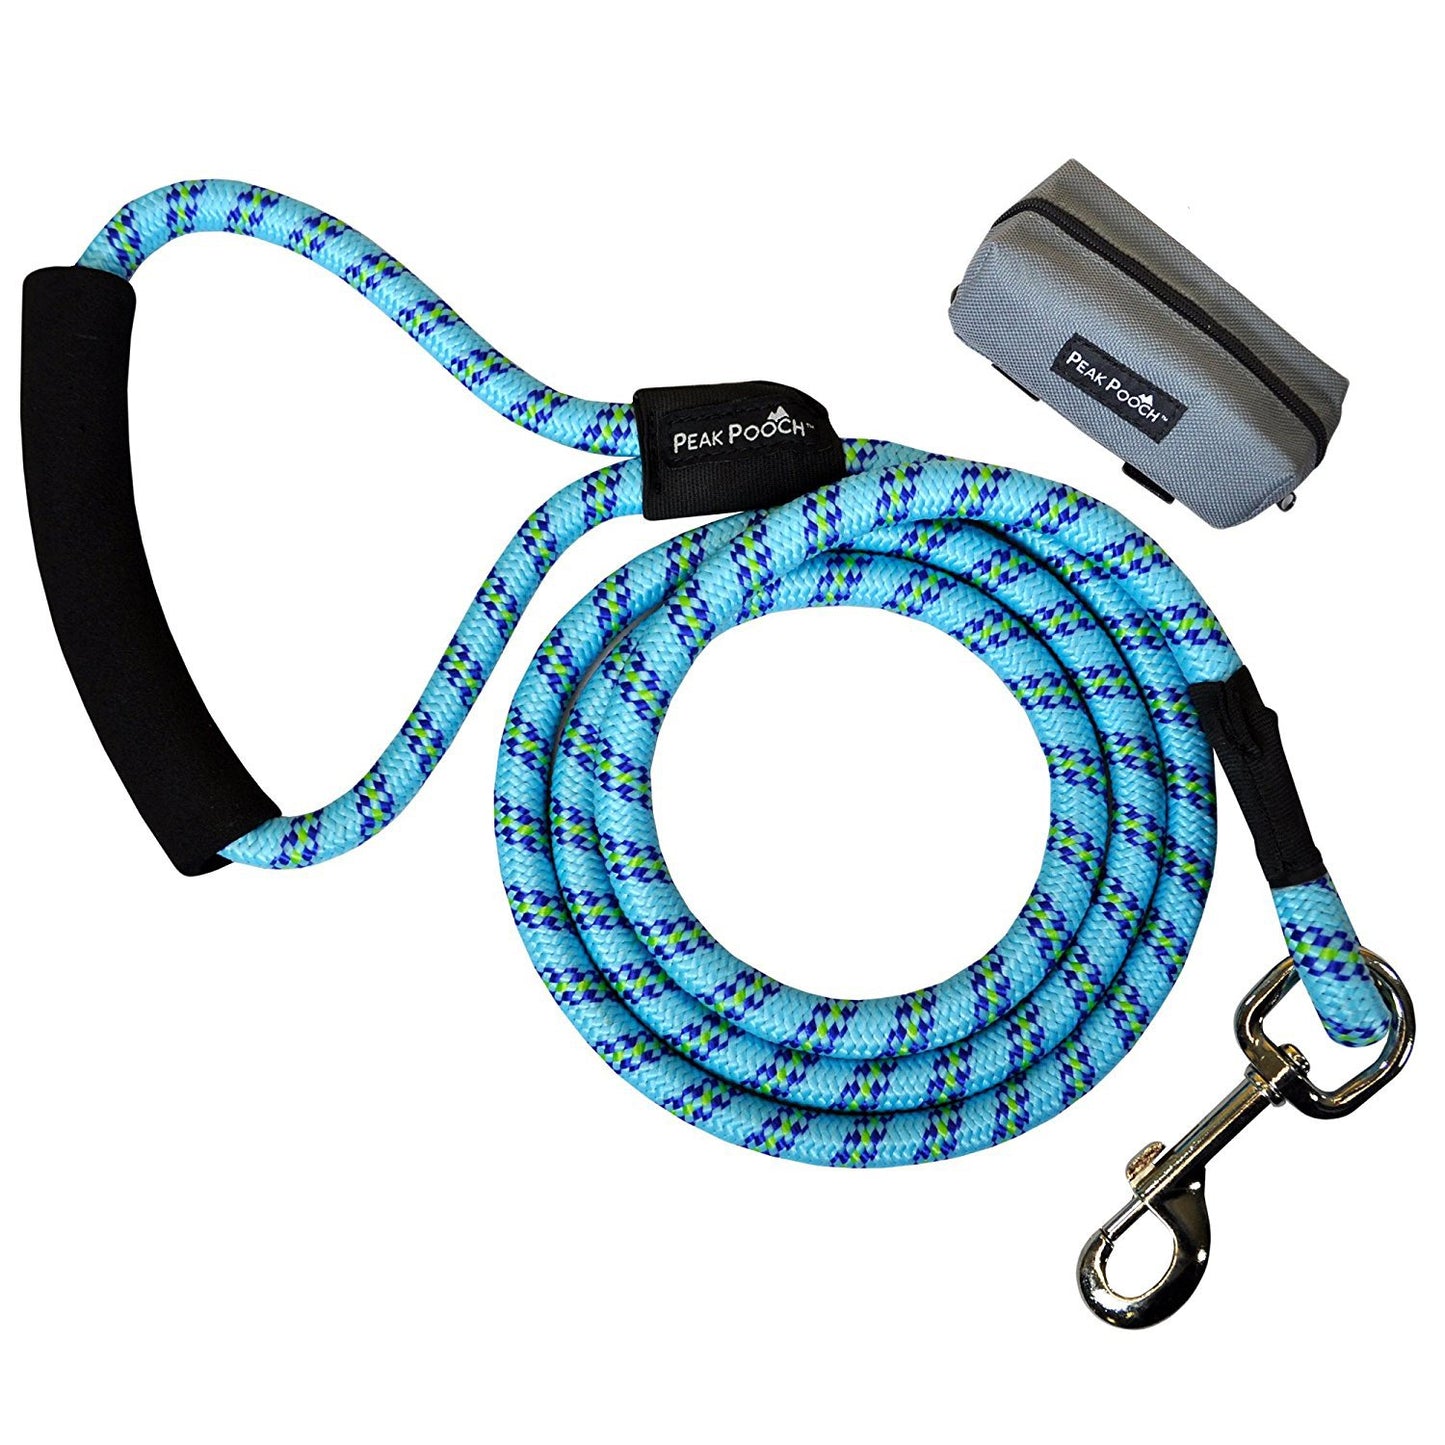 6' Dog Leash with Poop Bag Dispenser - Multi-Style and Color Options